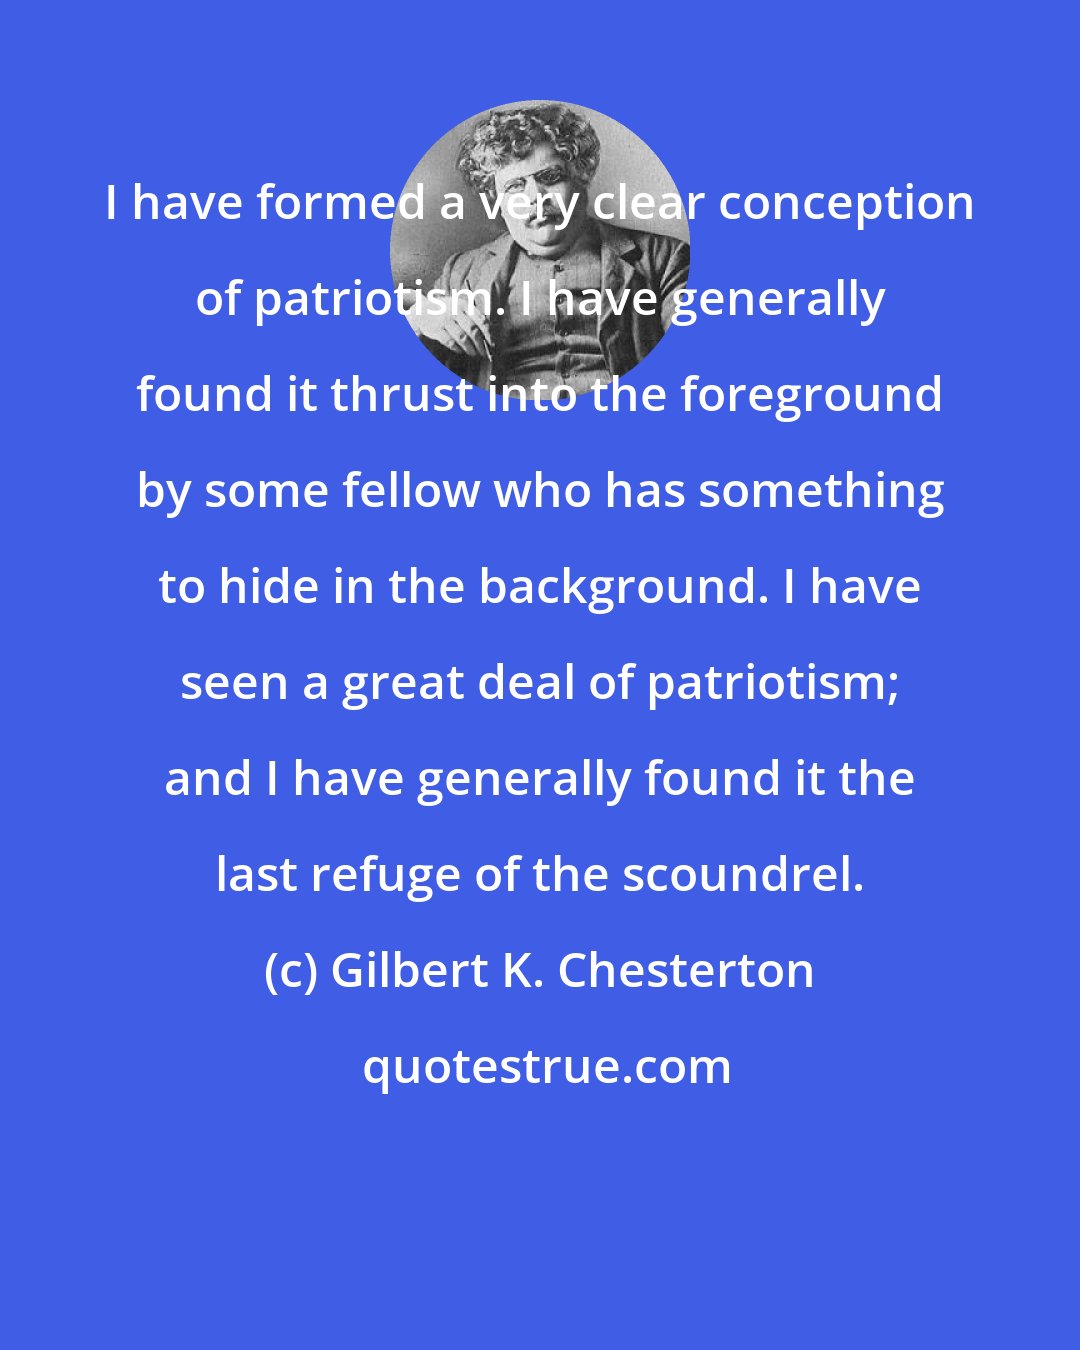 Gilbert K. Chesterton: I have formed a very clear conception of patriotism. I have generally found it thrust into the foreground by some fellow who has something to hide in the background. I have seen a great deal of patriotism; and I have generally found it the last refuge of the scoundrel.